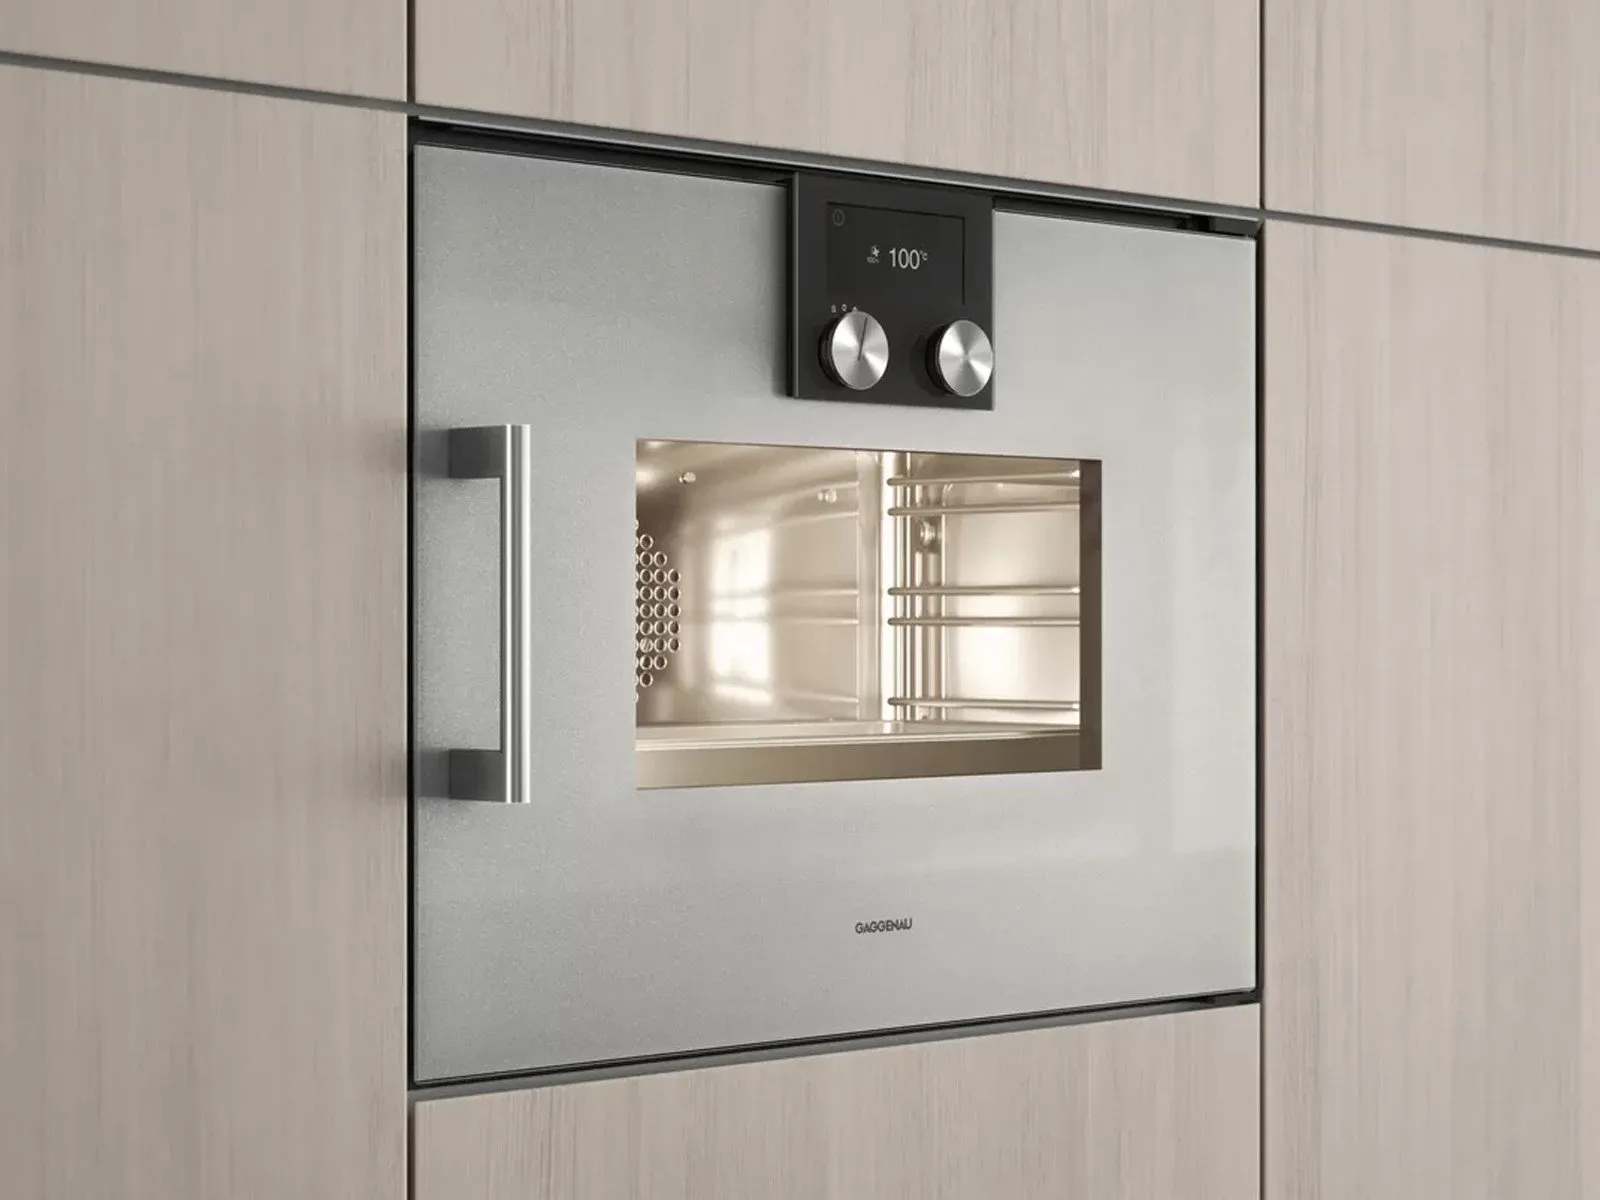 how much does a gaggenau steam oven cost